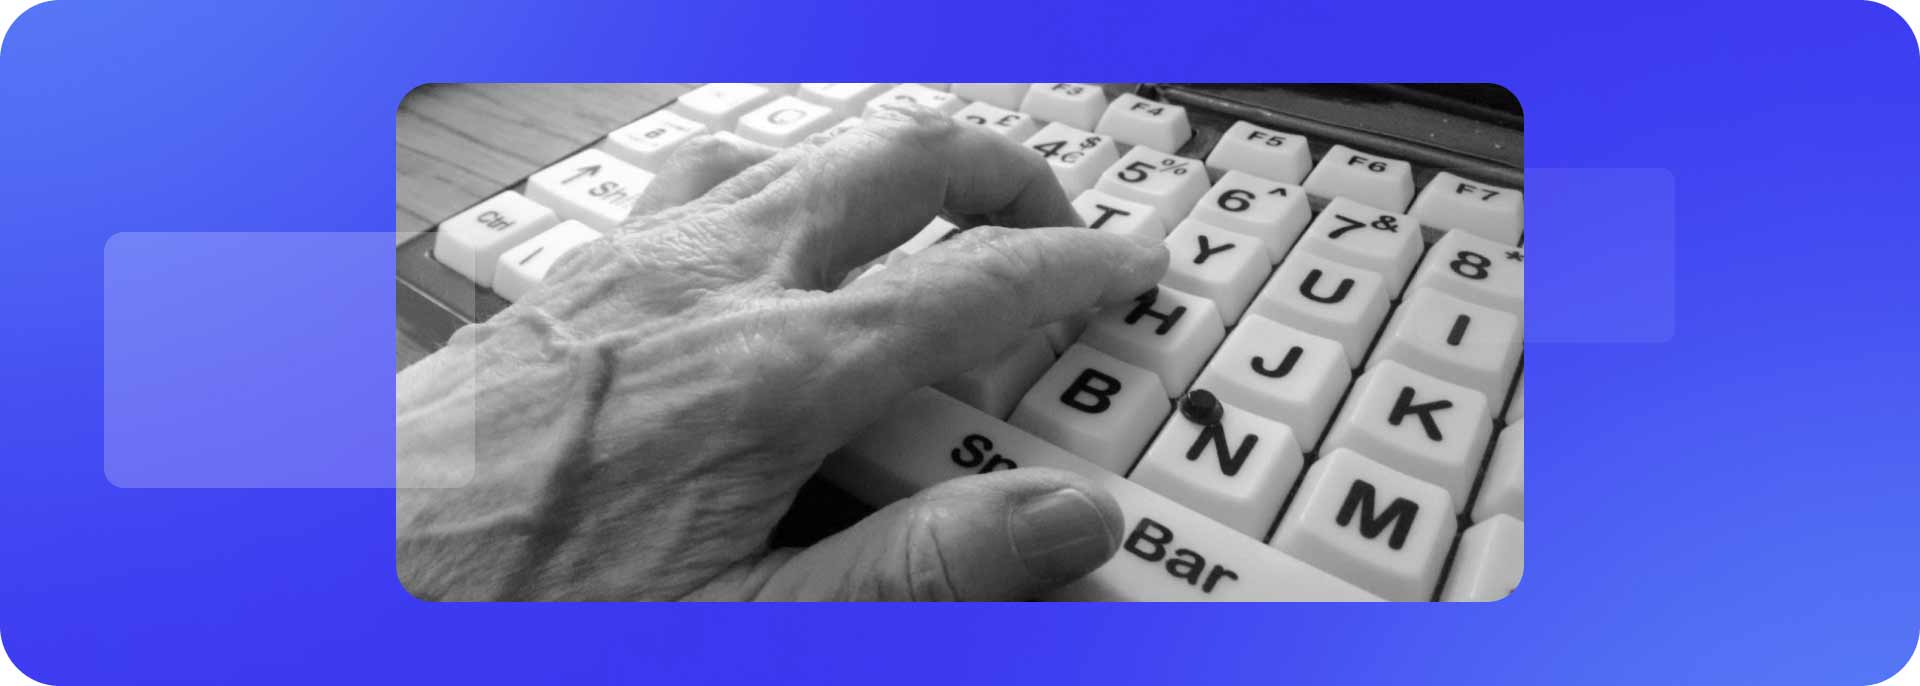 Old person’s hand on adaptive/accessible keyboard